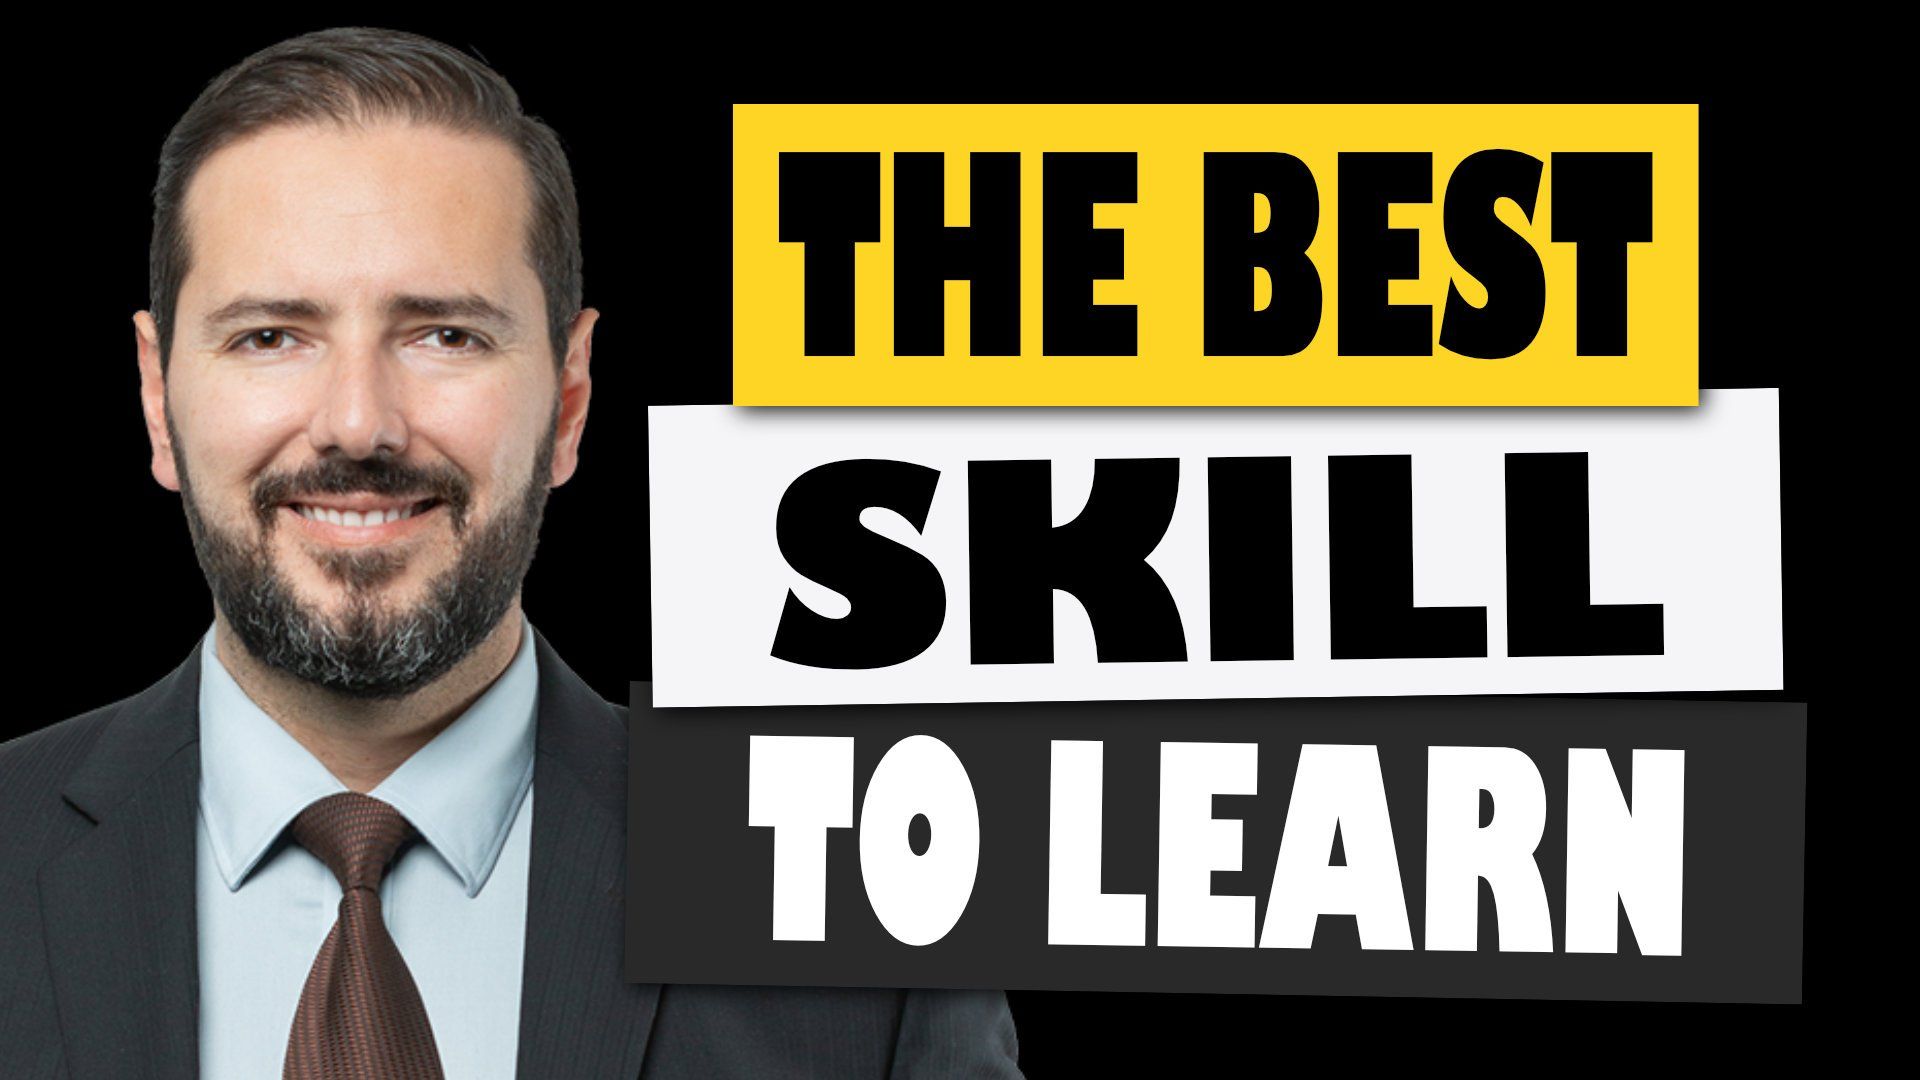 The best skill to learn, Miguel Guinard